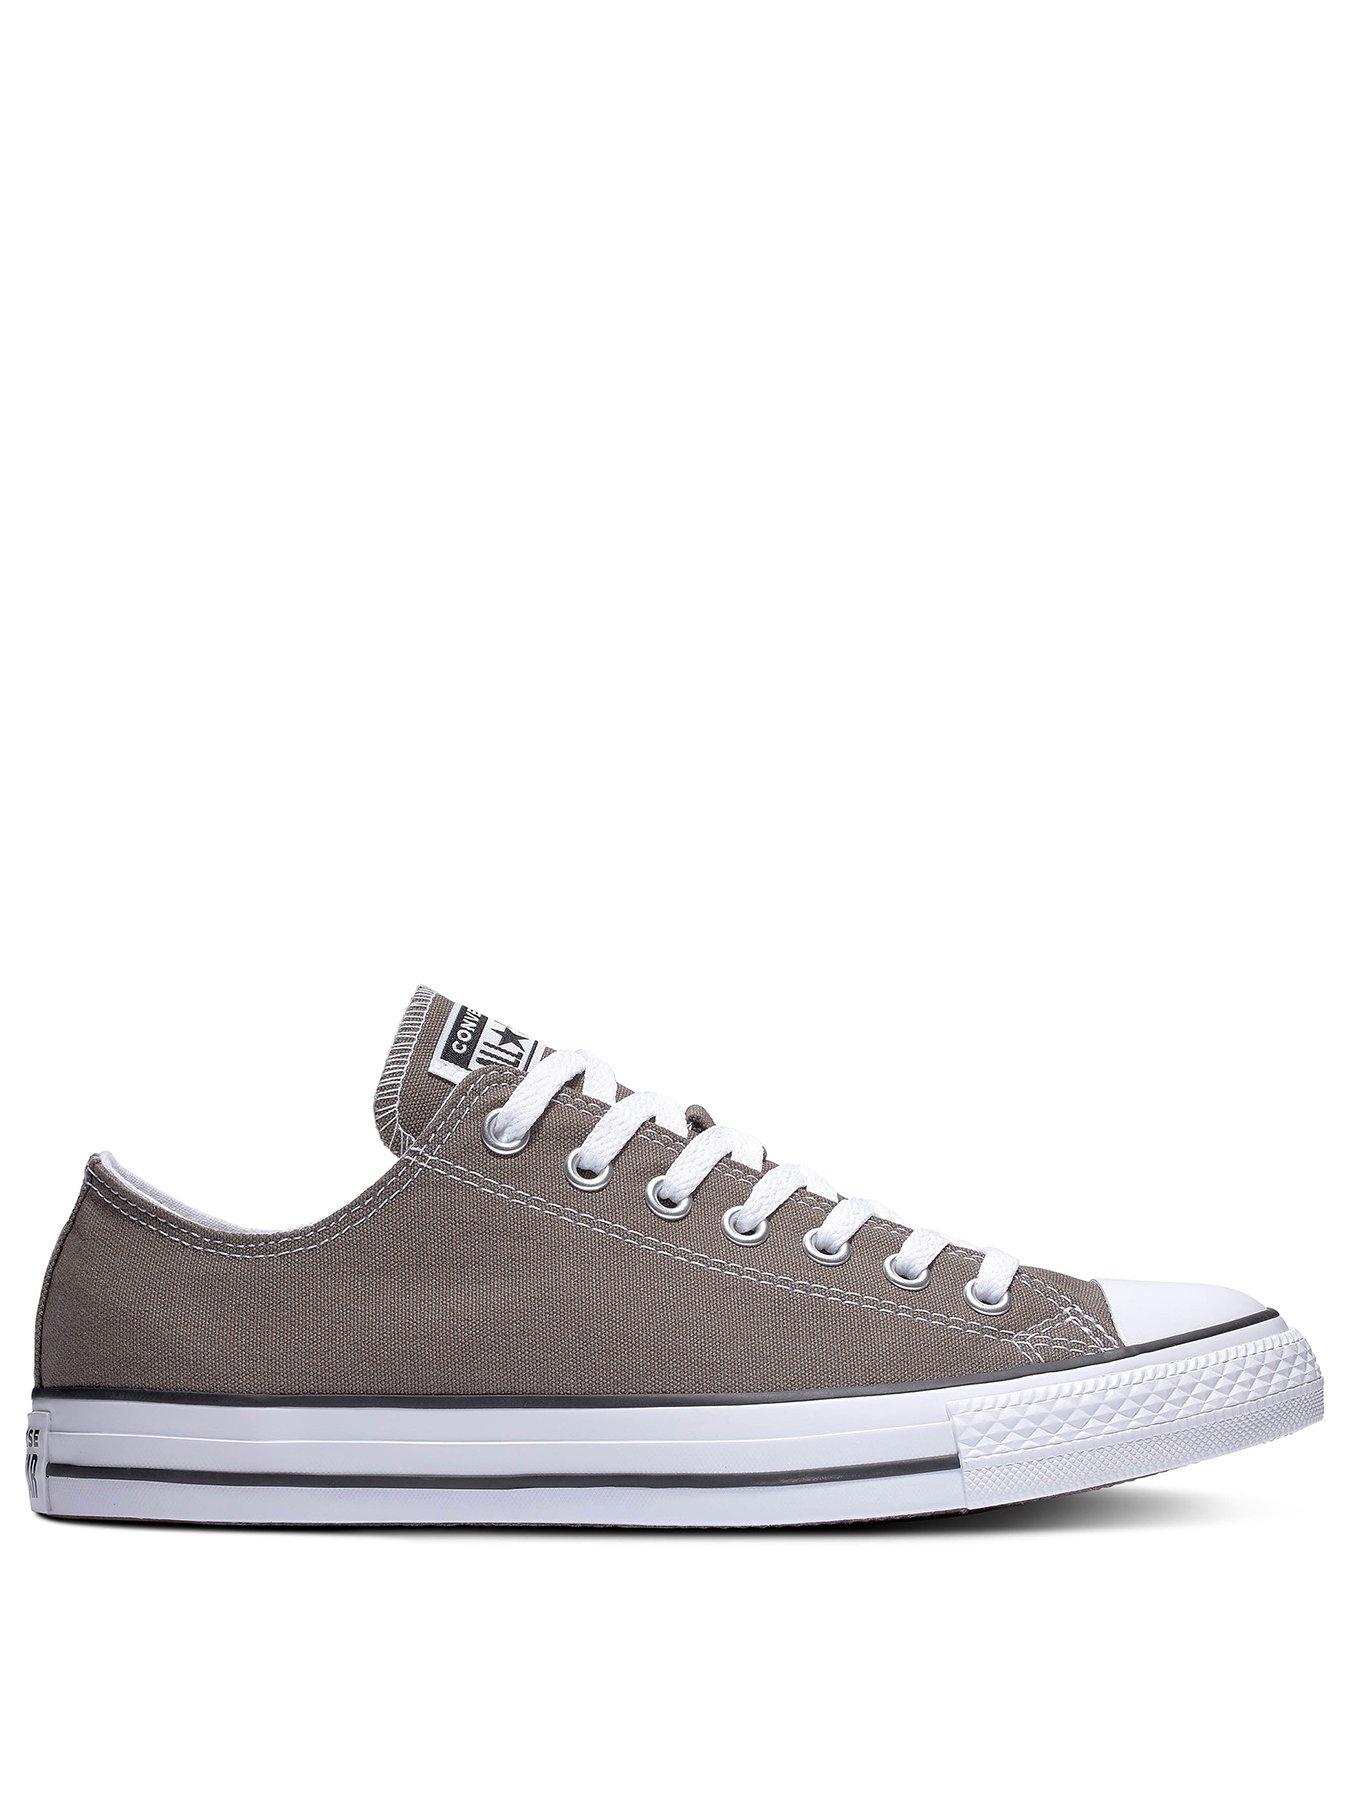 Trainers Chuck Taylor All Star Ox - Charcoal/White